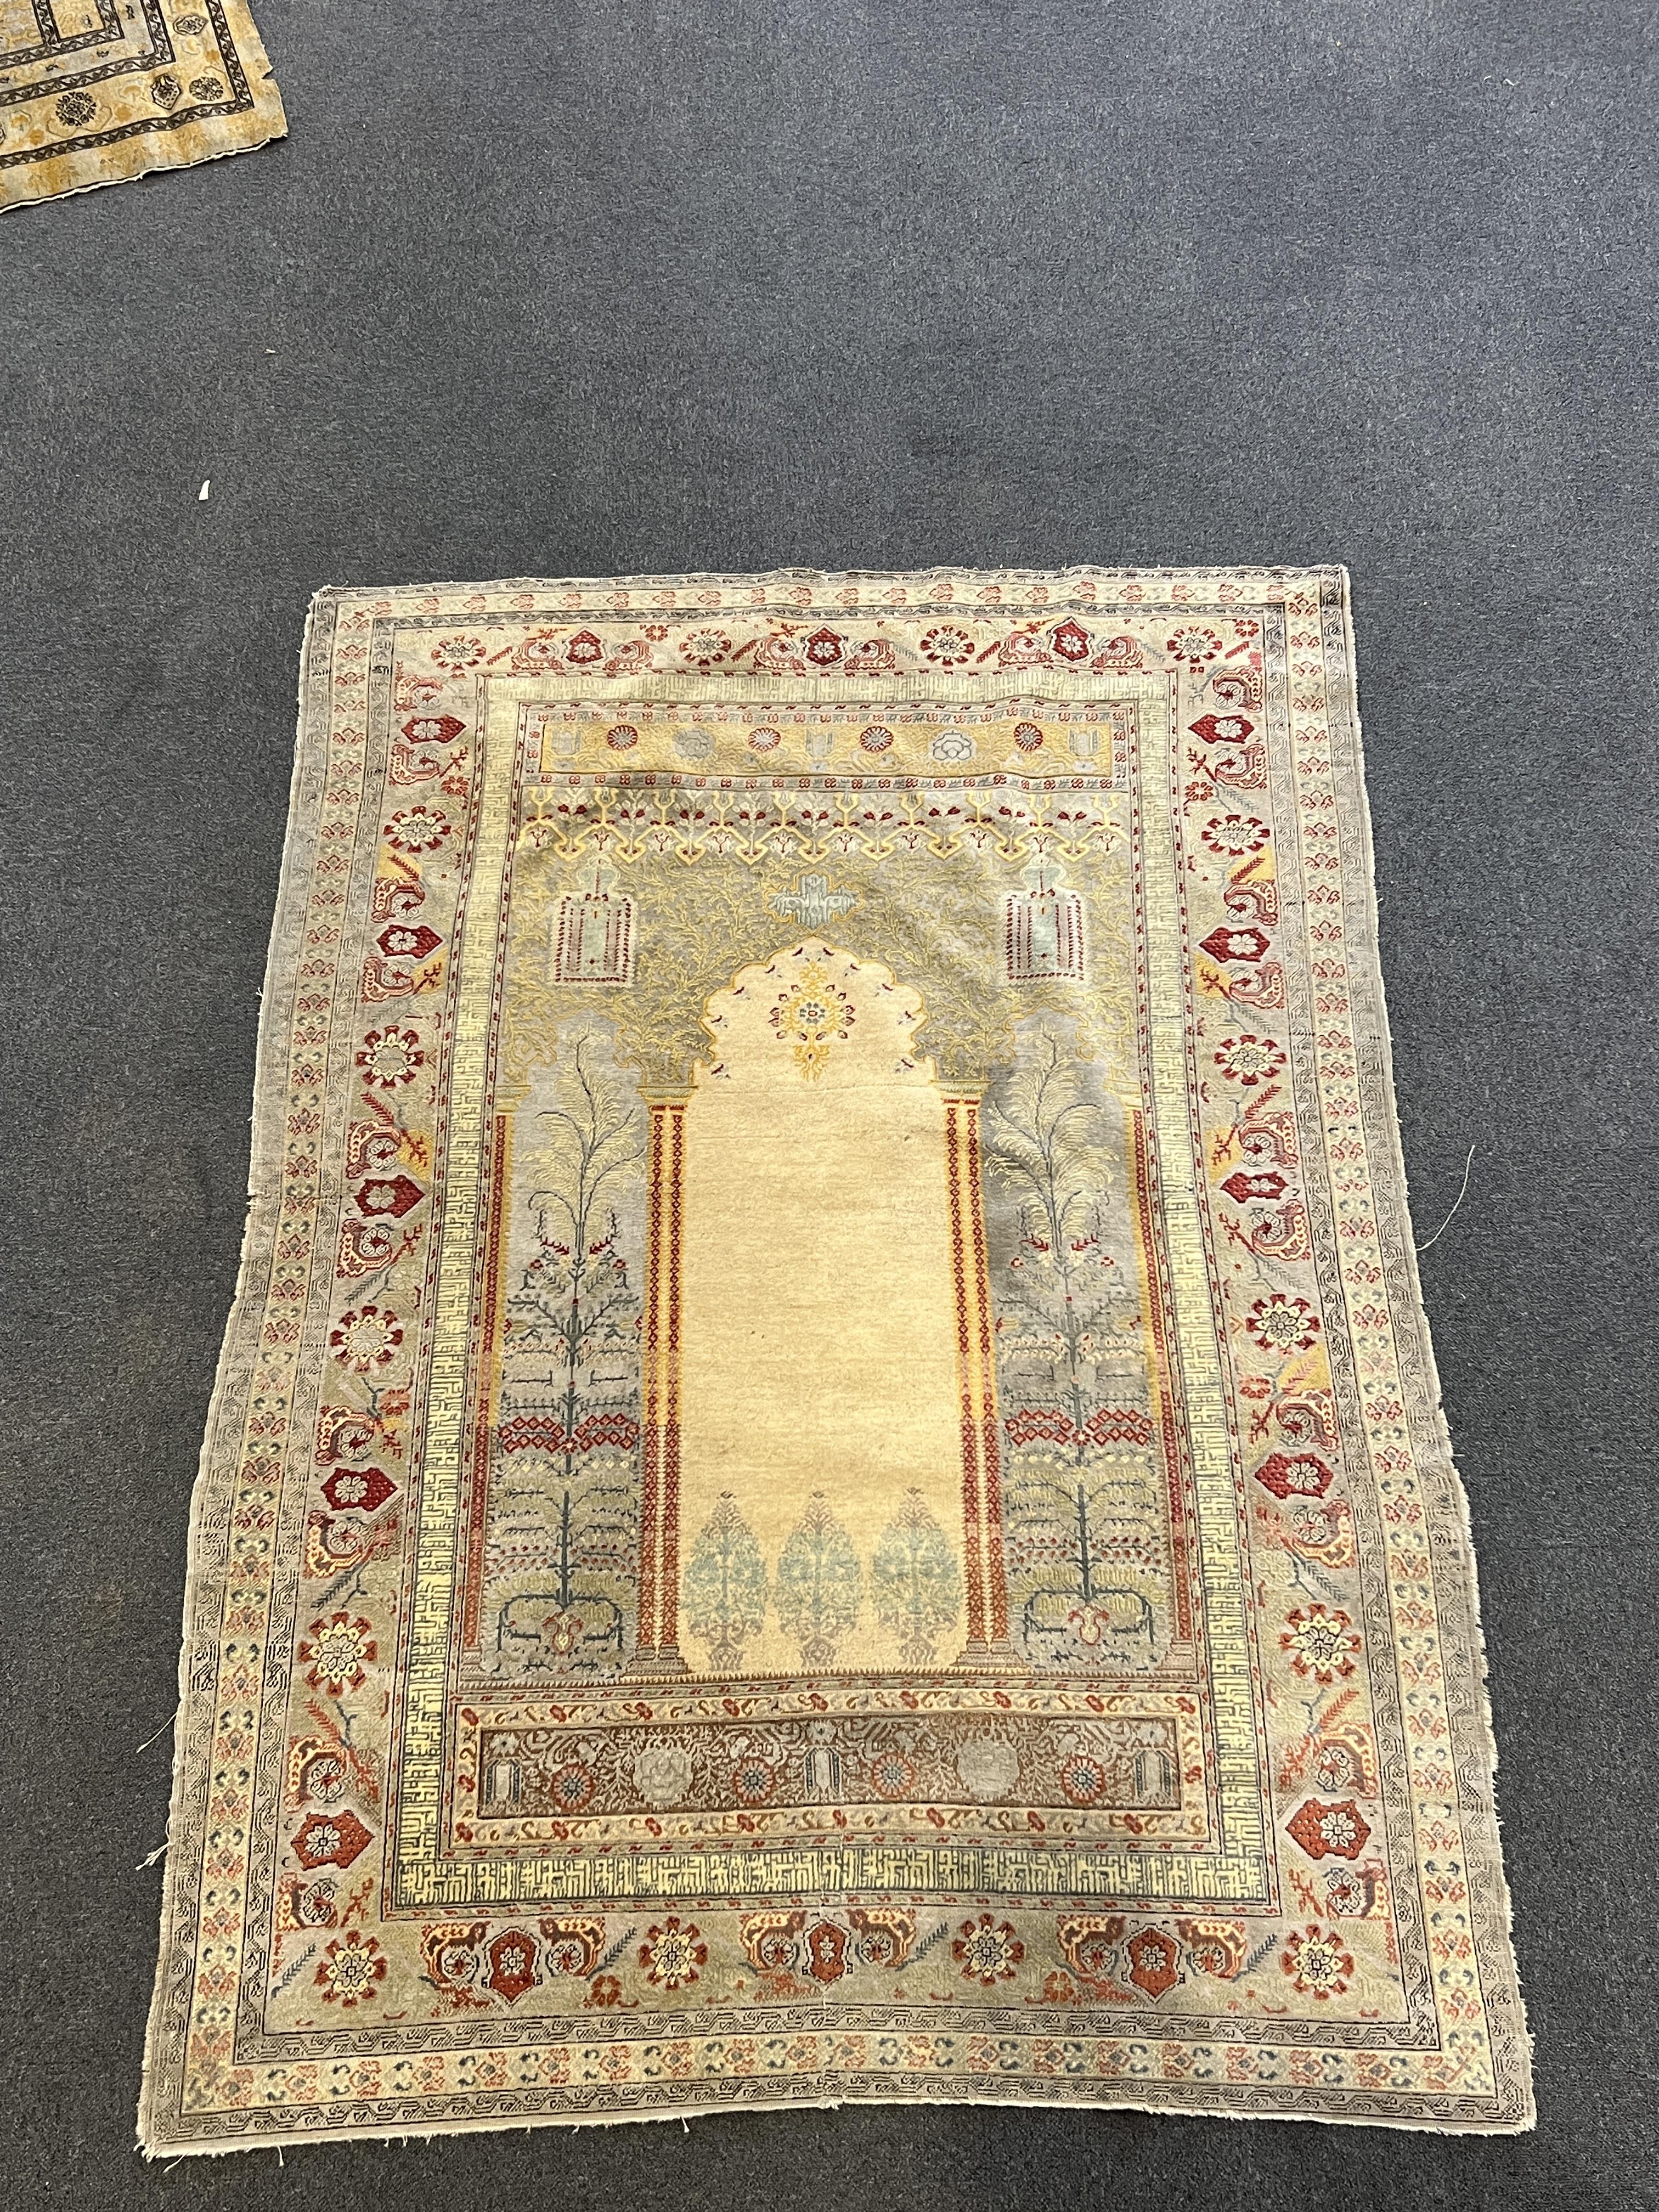 A Turkish silk prayer rug, with central mihrab and stylised floral borders, 205 x 122cm. Condition - worn and faded throughout, all edges worn with a degree of losses.